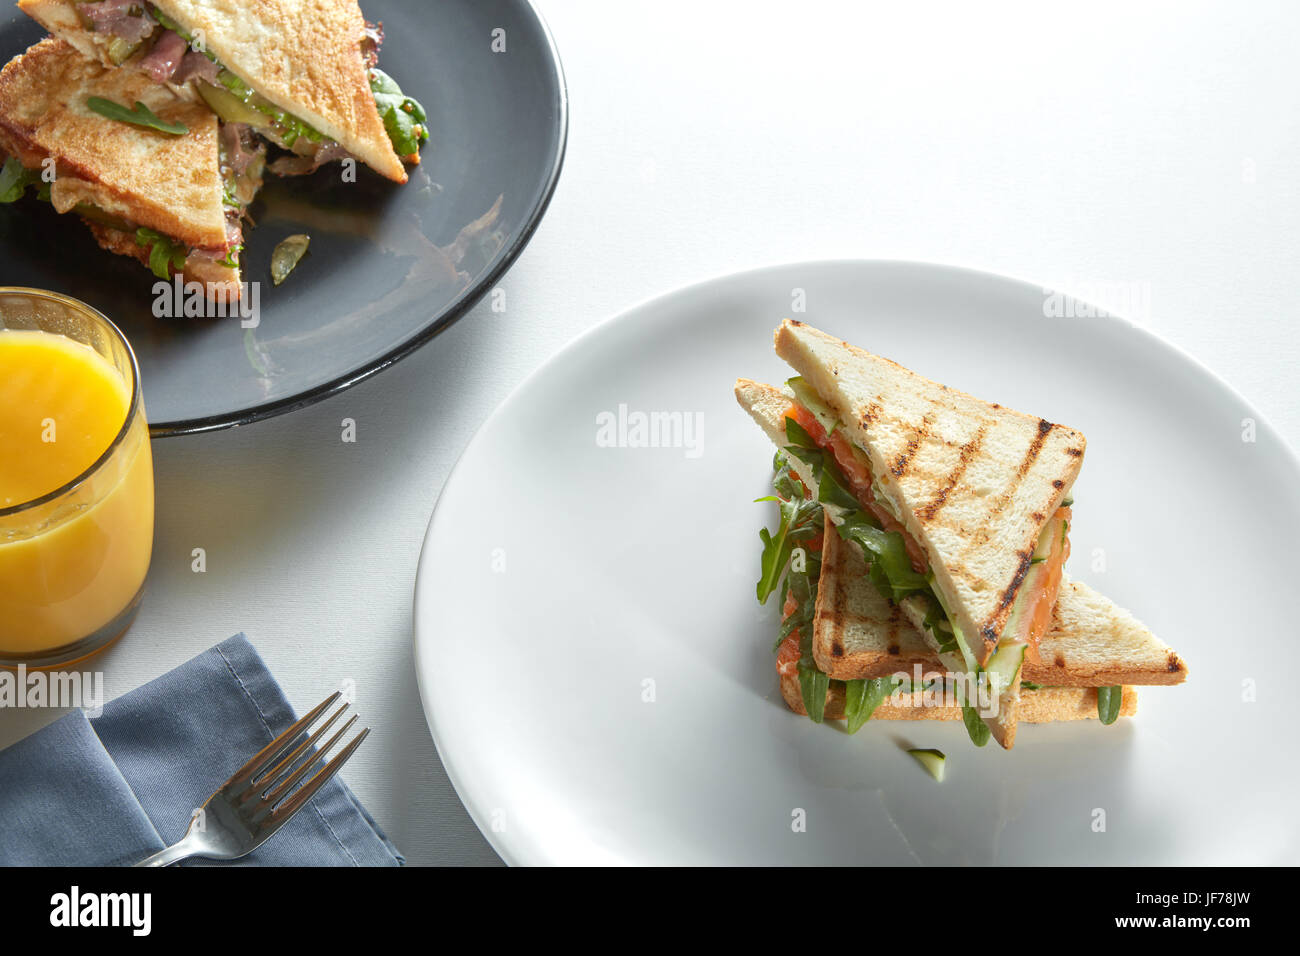 two club sandwich with various fillings Stock Photo